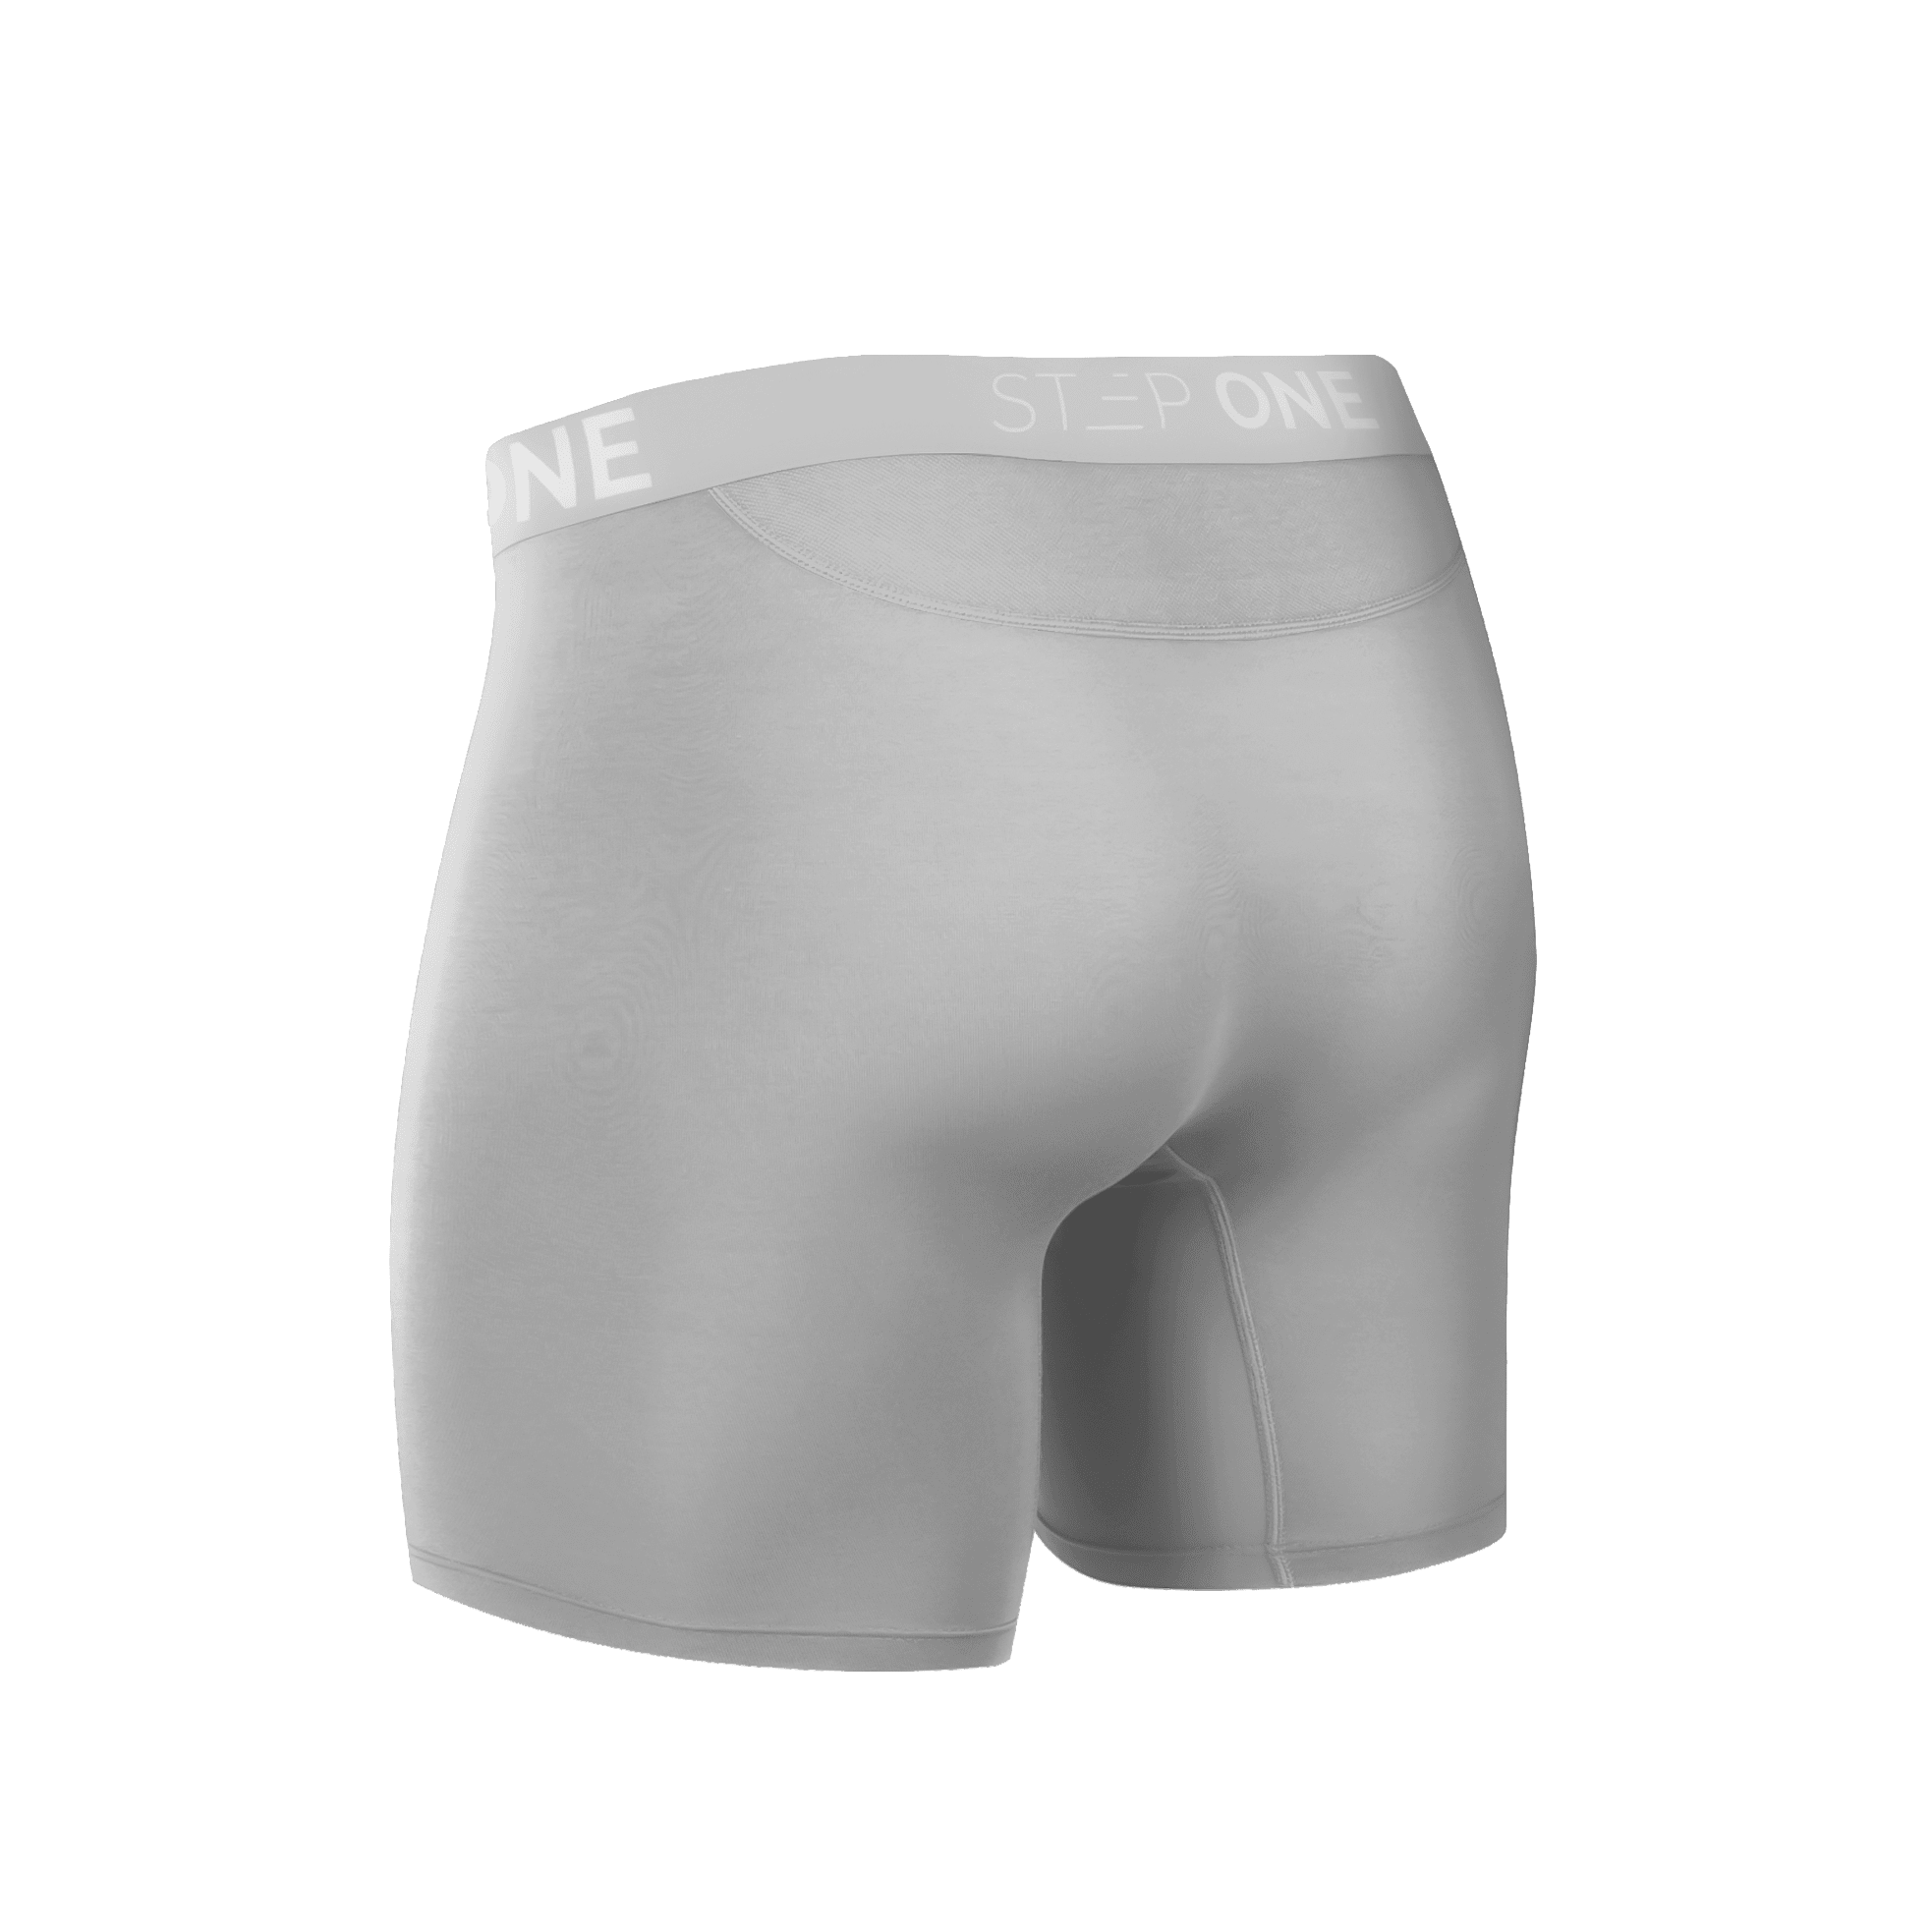 Boxer Brief - Tin Cans - View 3